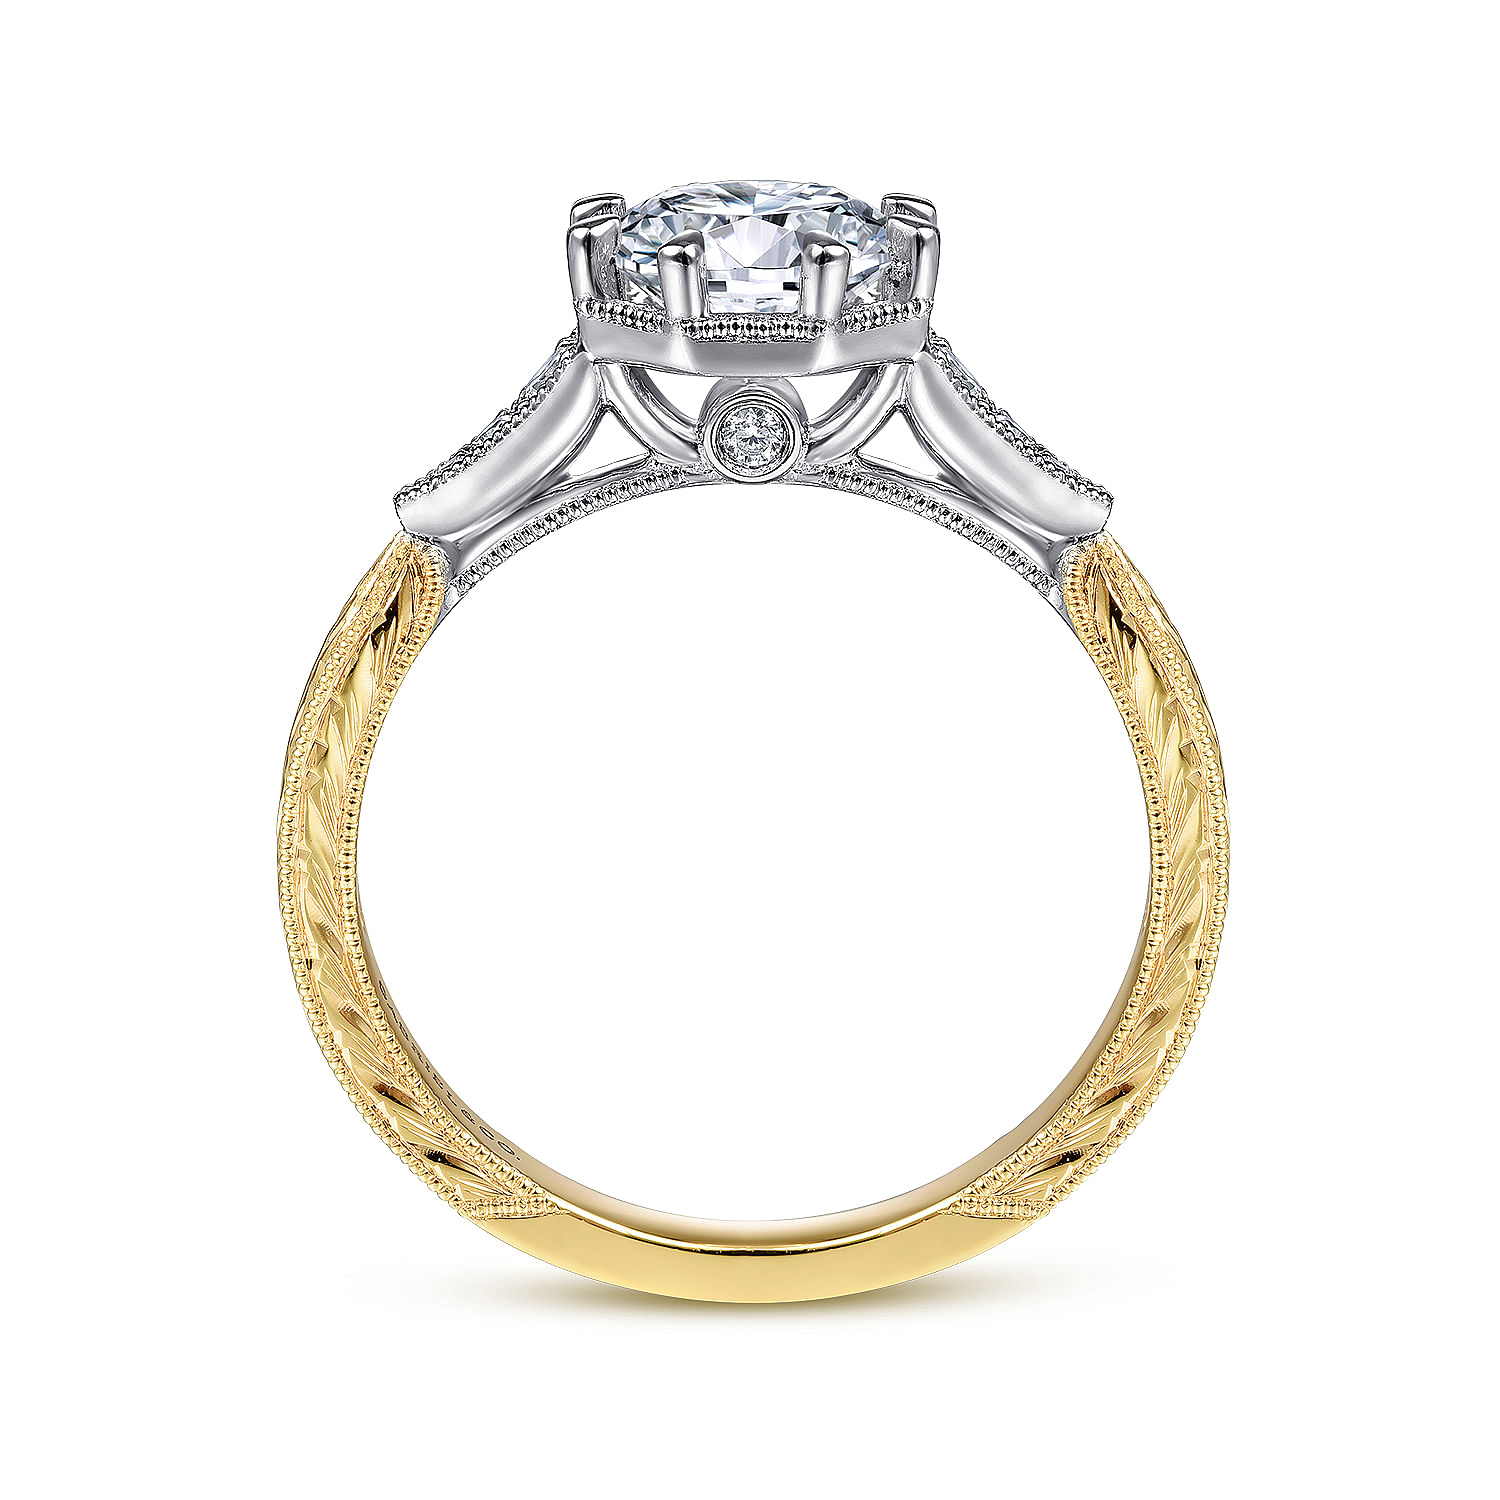 Vintage Inspired 14K White-Yellow Gold Round Diamond Channel Set Engagement Ring